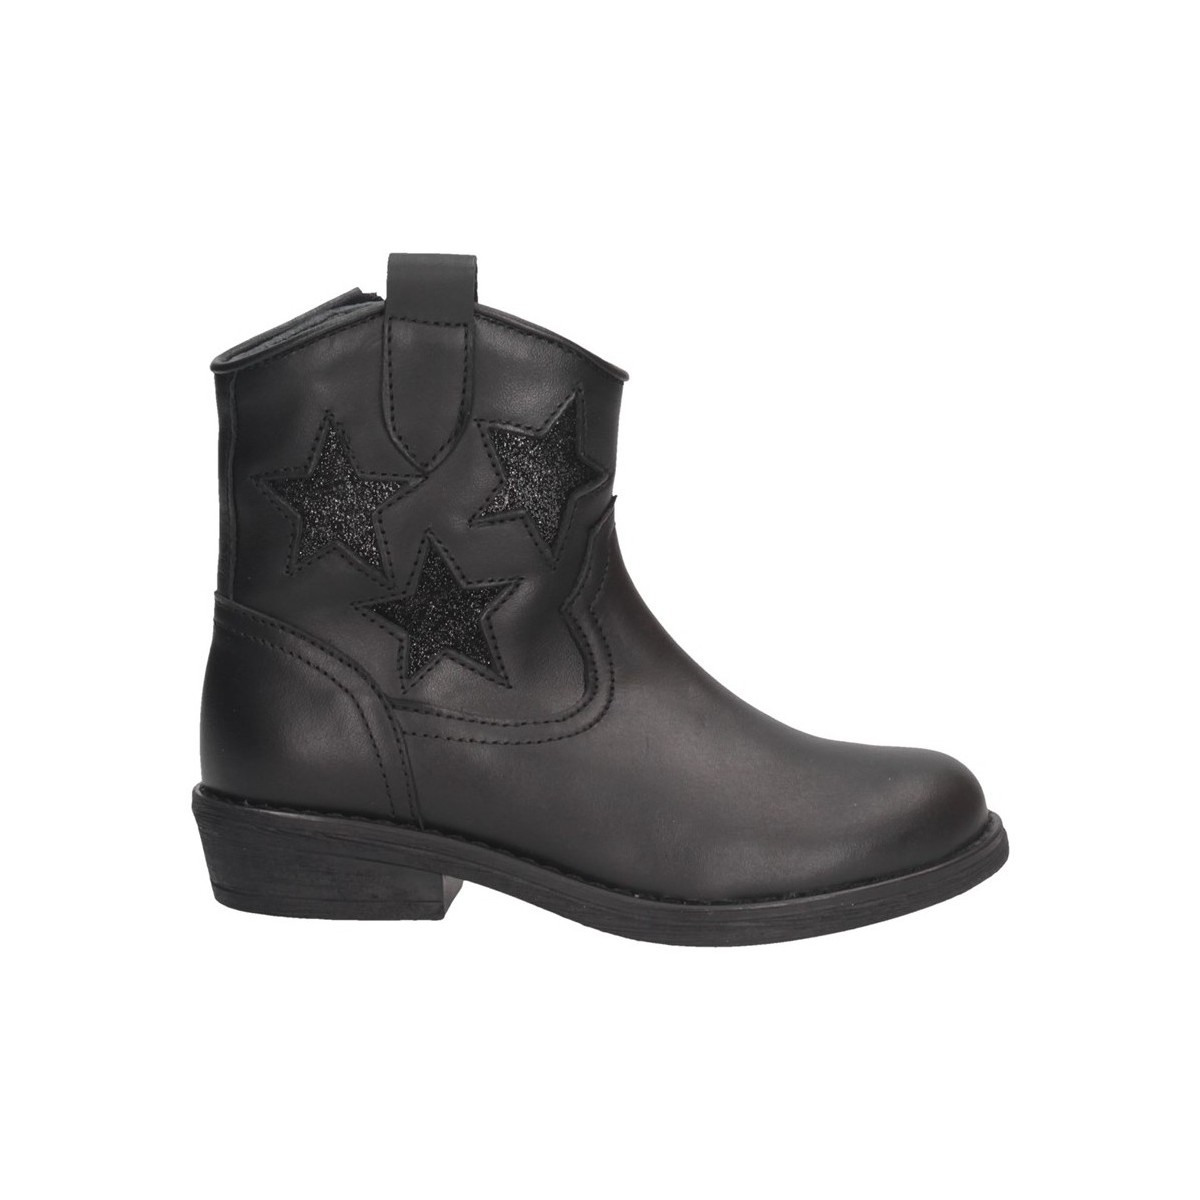 Chaussures Fille Bottes ville Dianetti Made In Italy I9790 Texano Enfant NOIR Noir